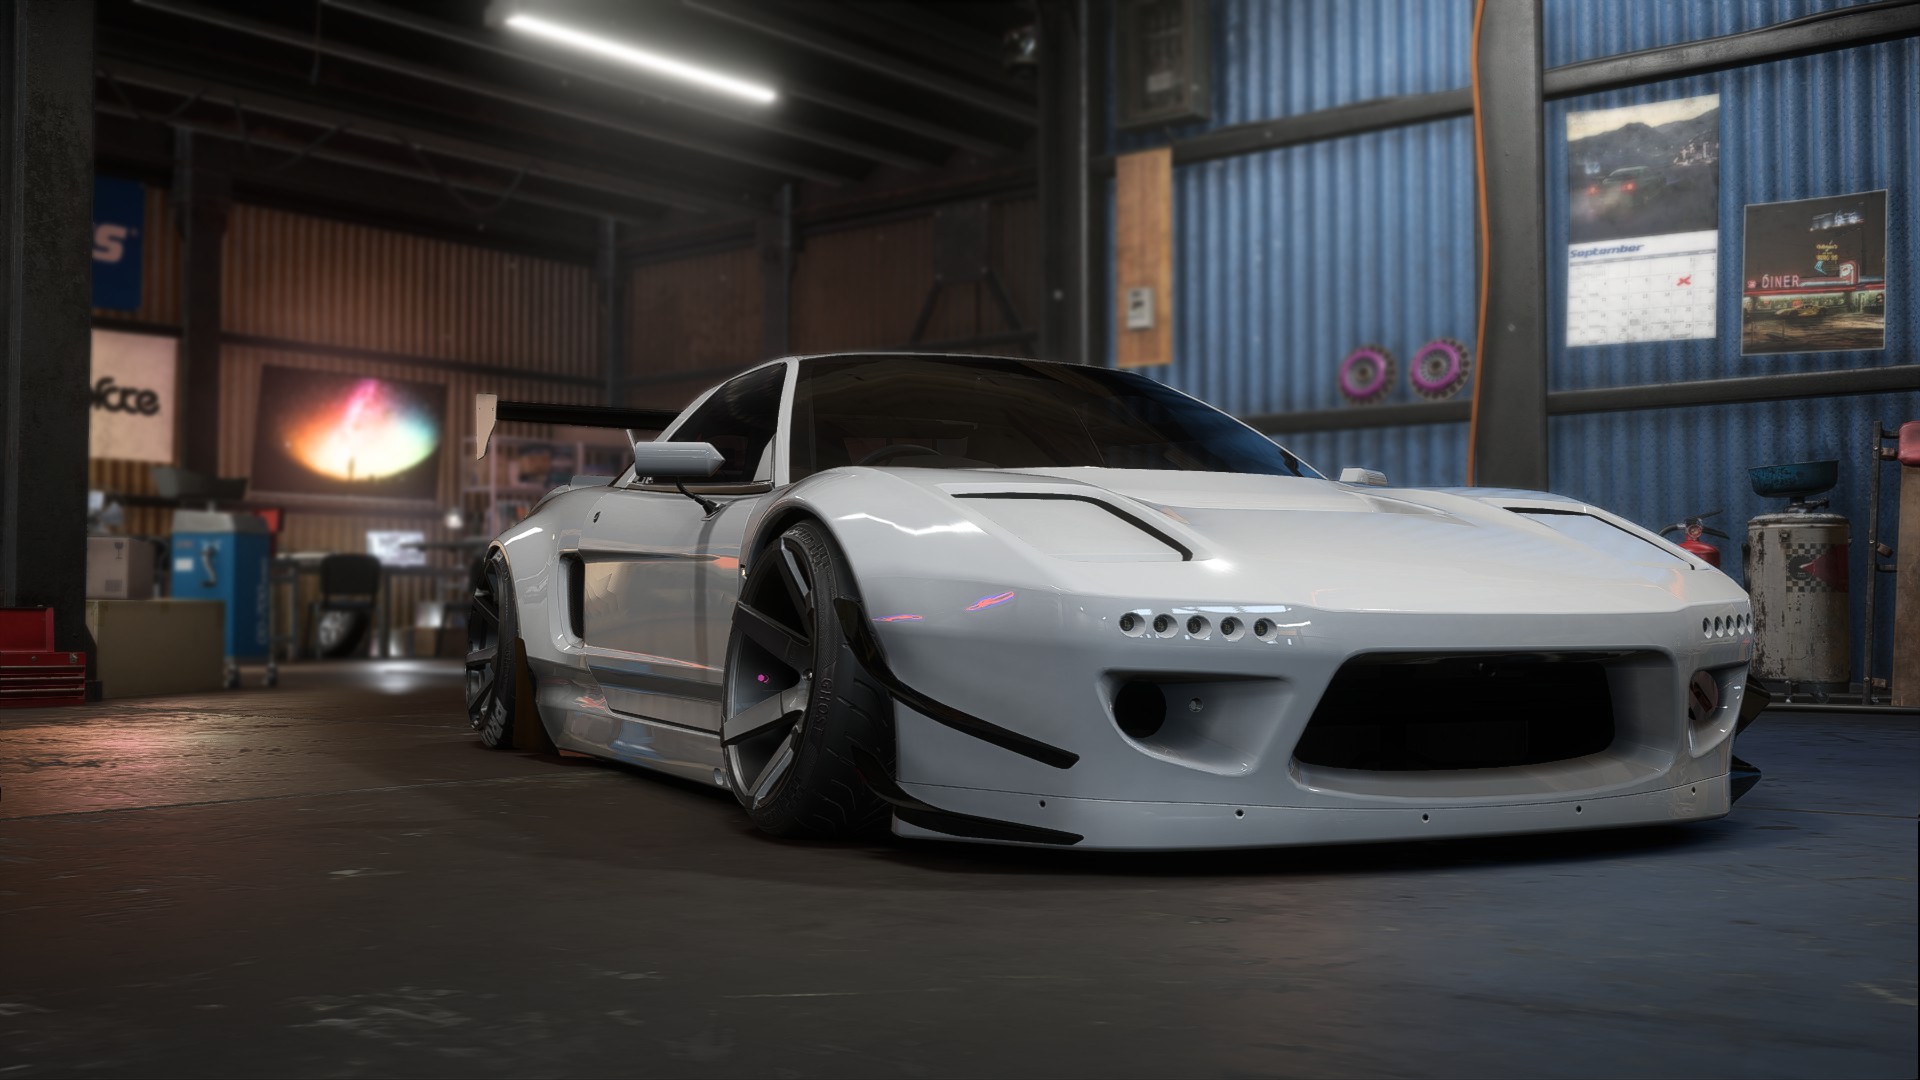 General 1920x1080 Honda Need for Speed Need for Speed Payback Rocket Bunny Honda NSX pop-up headlights Honda NSX mk1 video games Japanese cars Electronic Arts Criterion Games